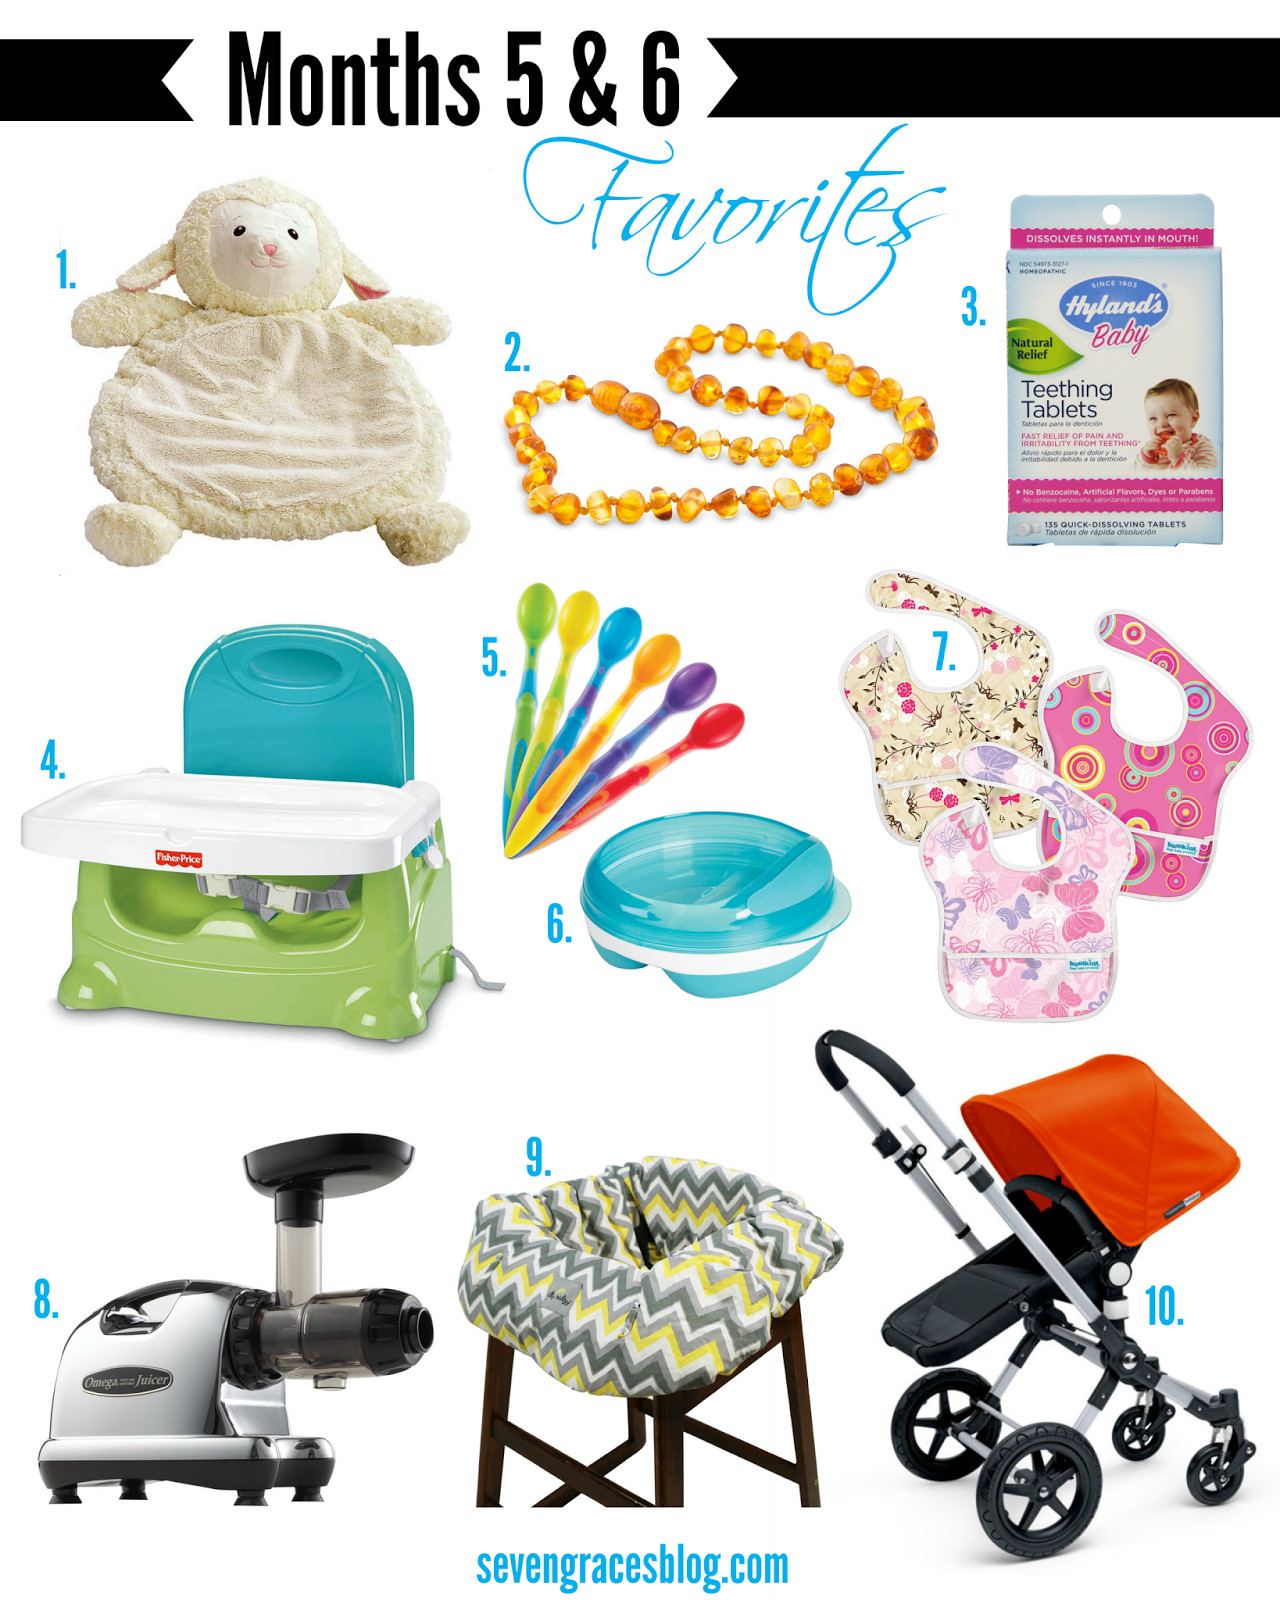 5 Month Old Christmas Gift Ideas
 Top 10 Baby Items for Months 5 & 6 Teething & Feeding